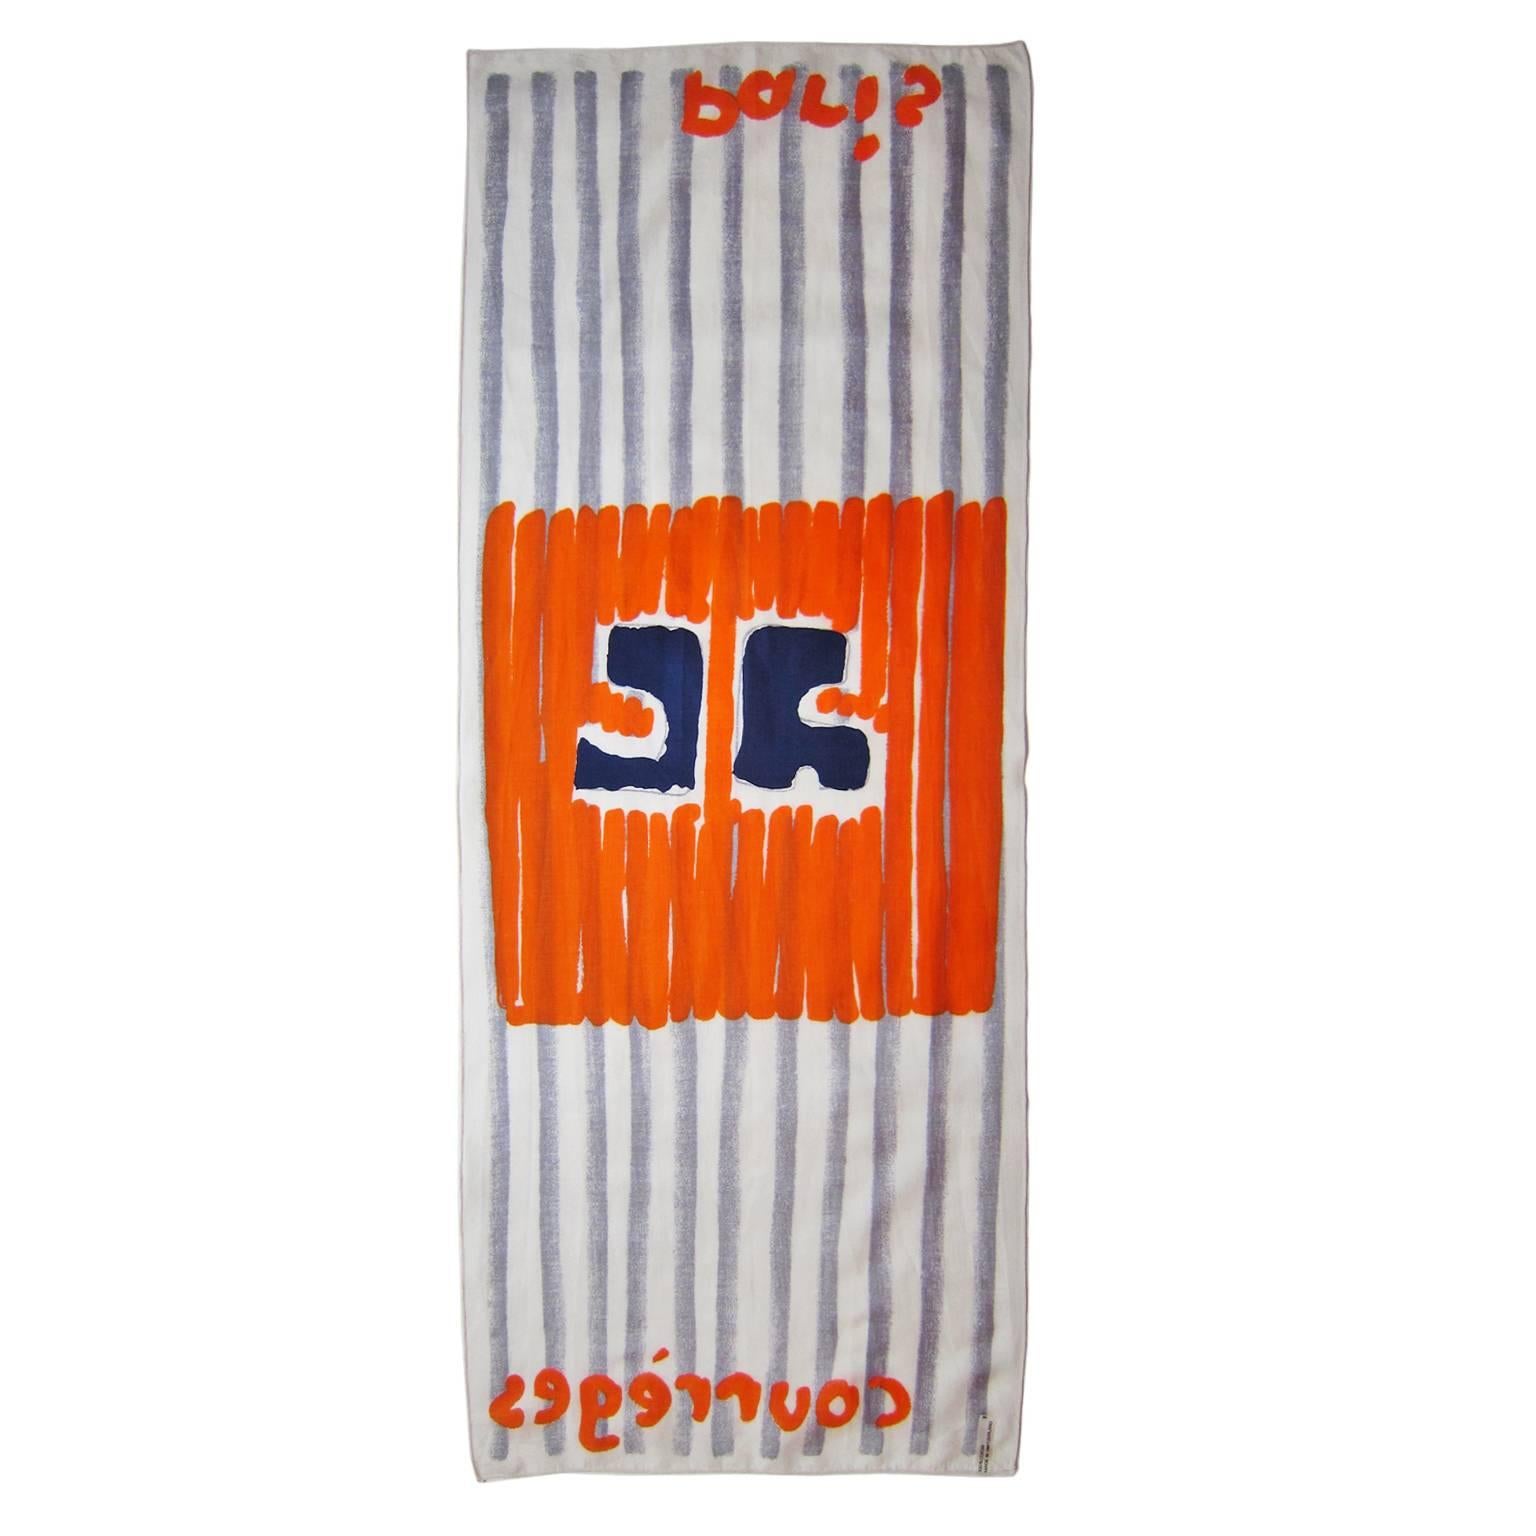 Courreges cotton scarf from 1960s. In white / light grey stripe, bright orange and navy hand drawn graphic logo.
Made in Switzerland.

83 cm x 33 cm